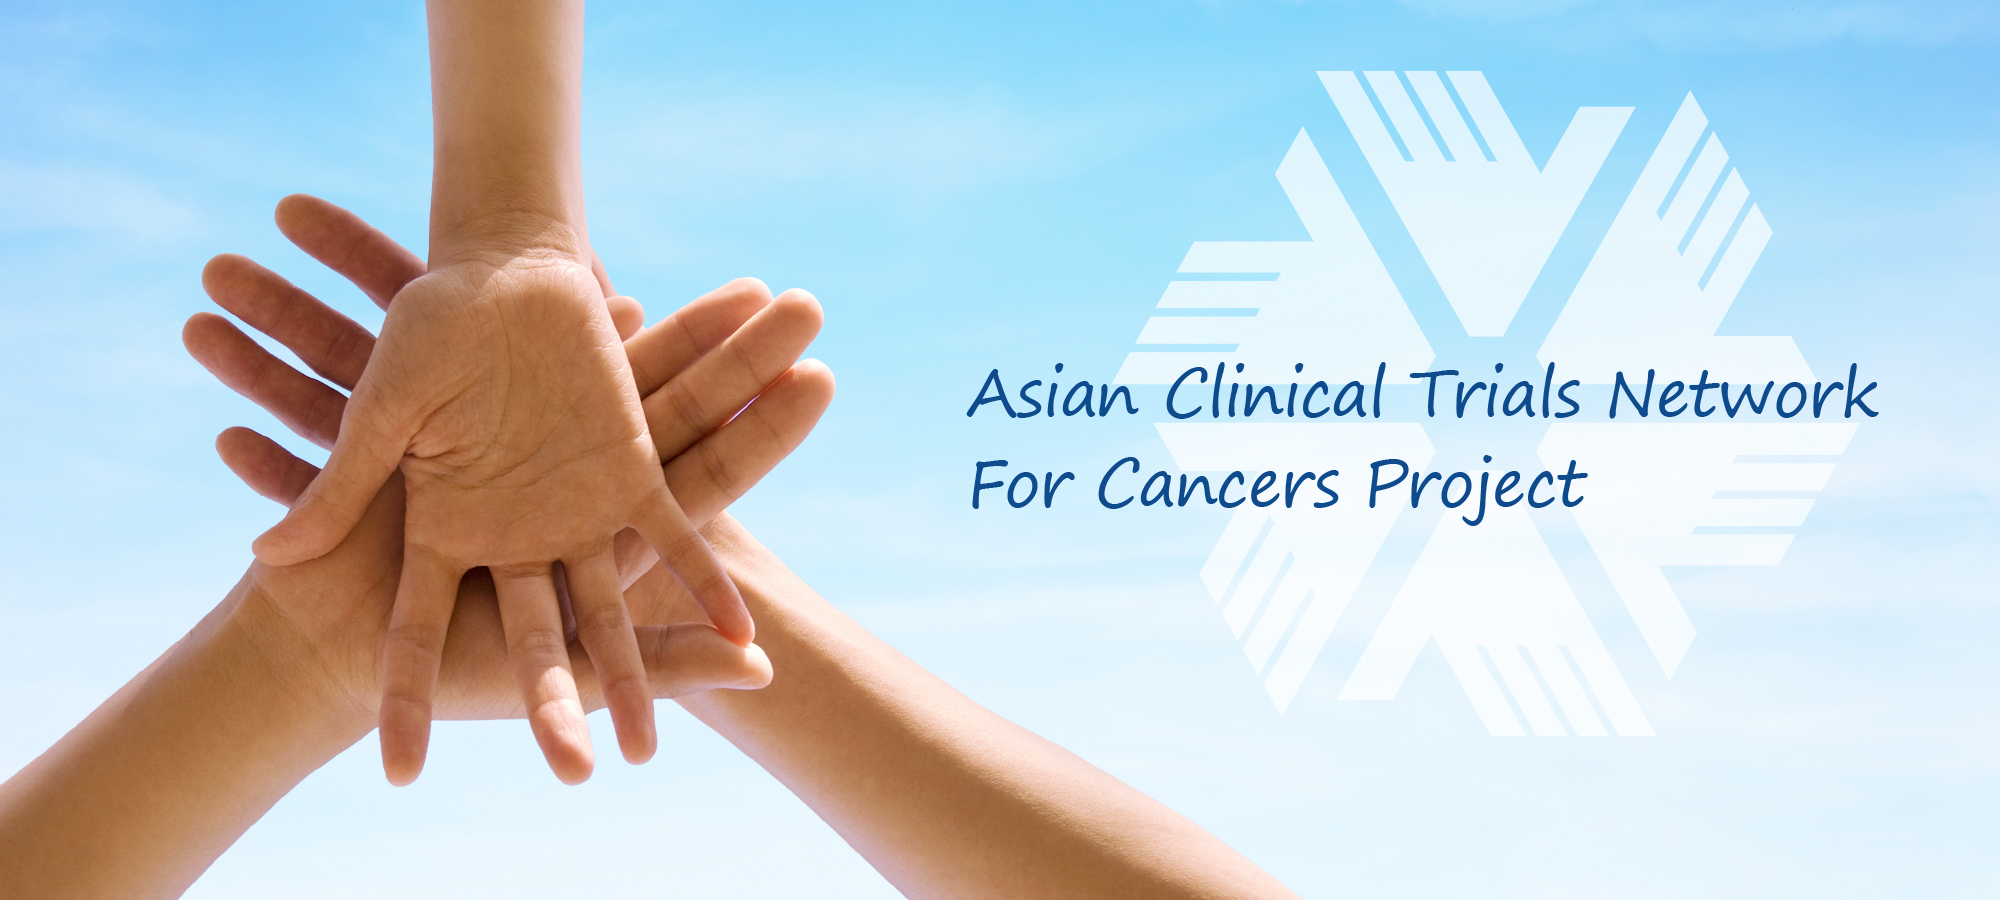 Asia Clinical Trials Network for Cancers Project